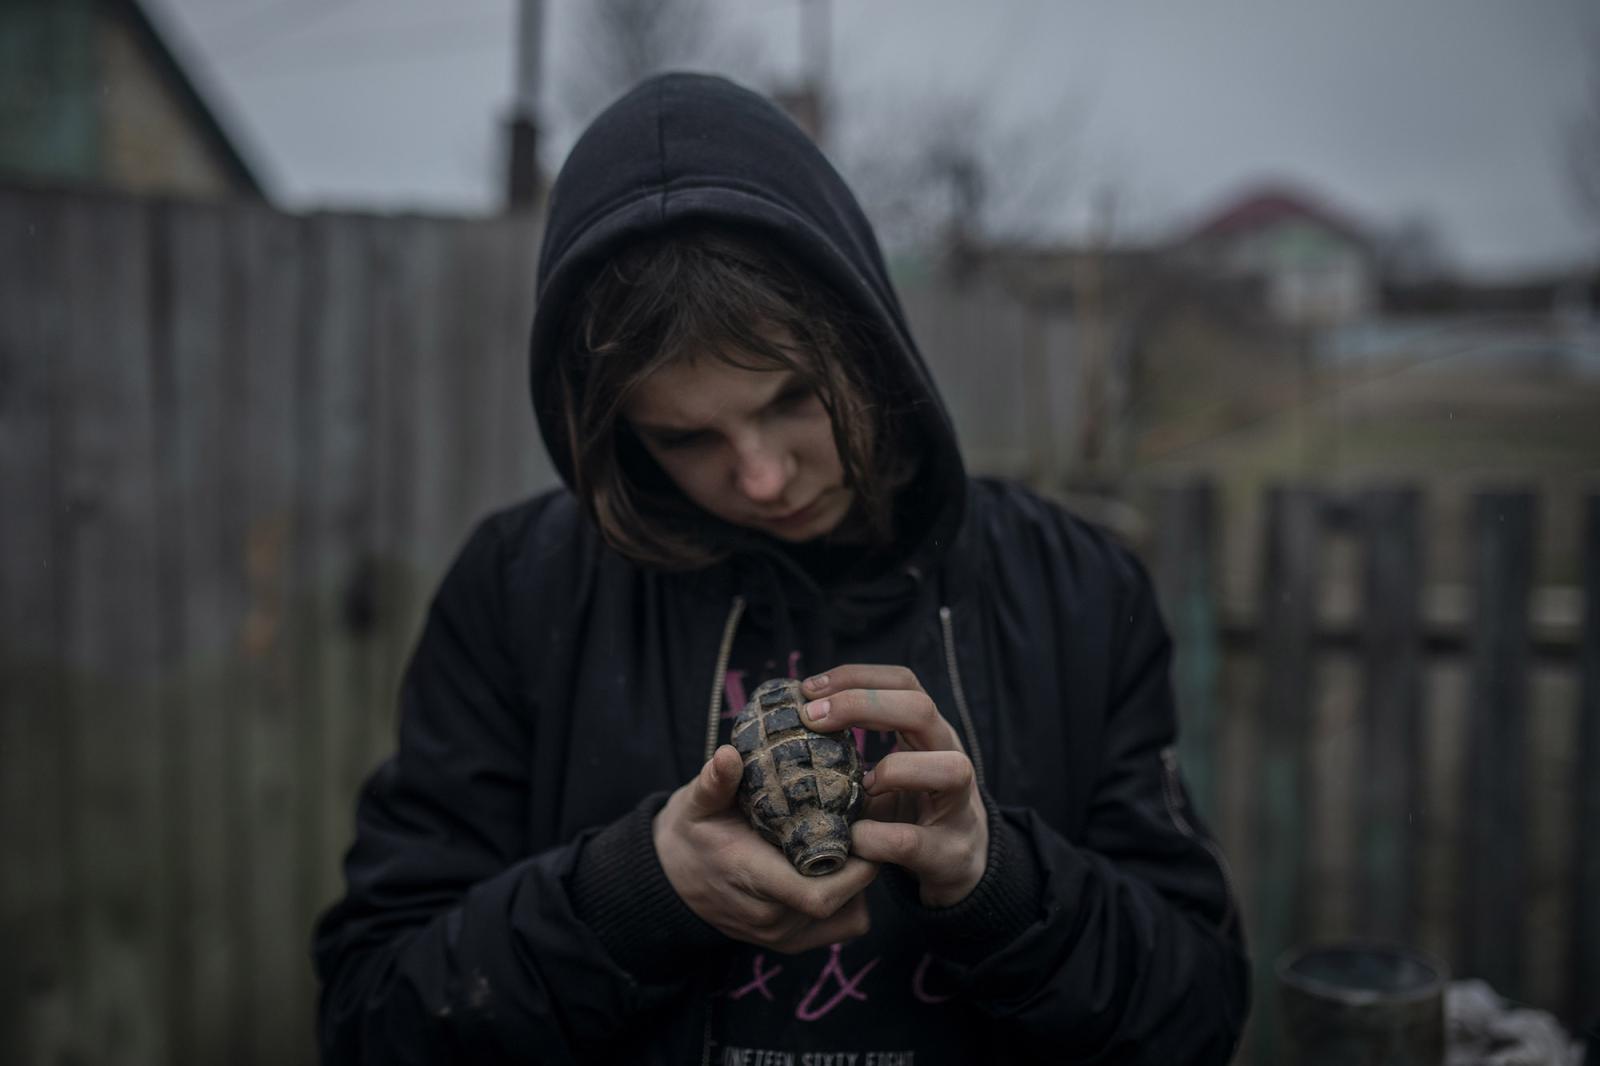 THE BUCHA MASSACRE - Ruslana, 10, holds a deactivated grenade outside her home...